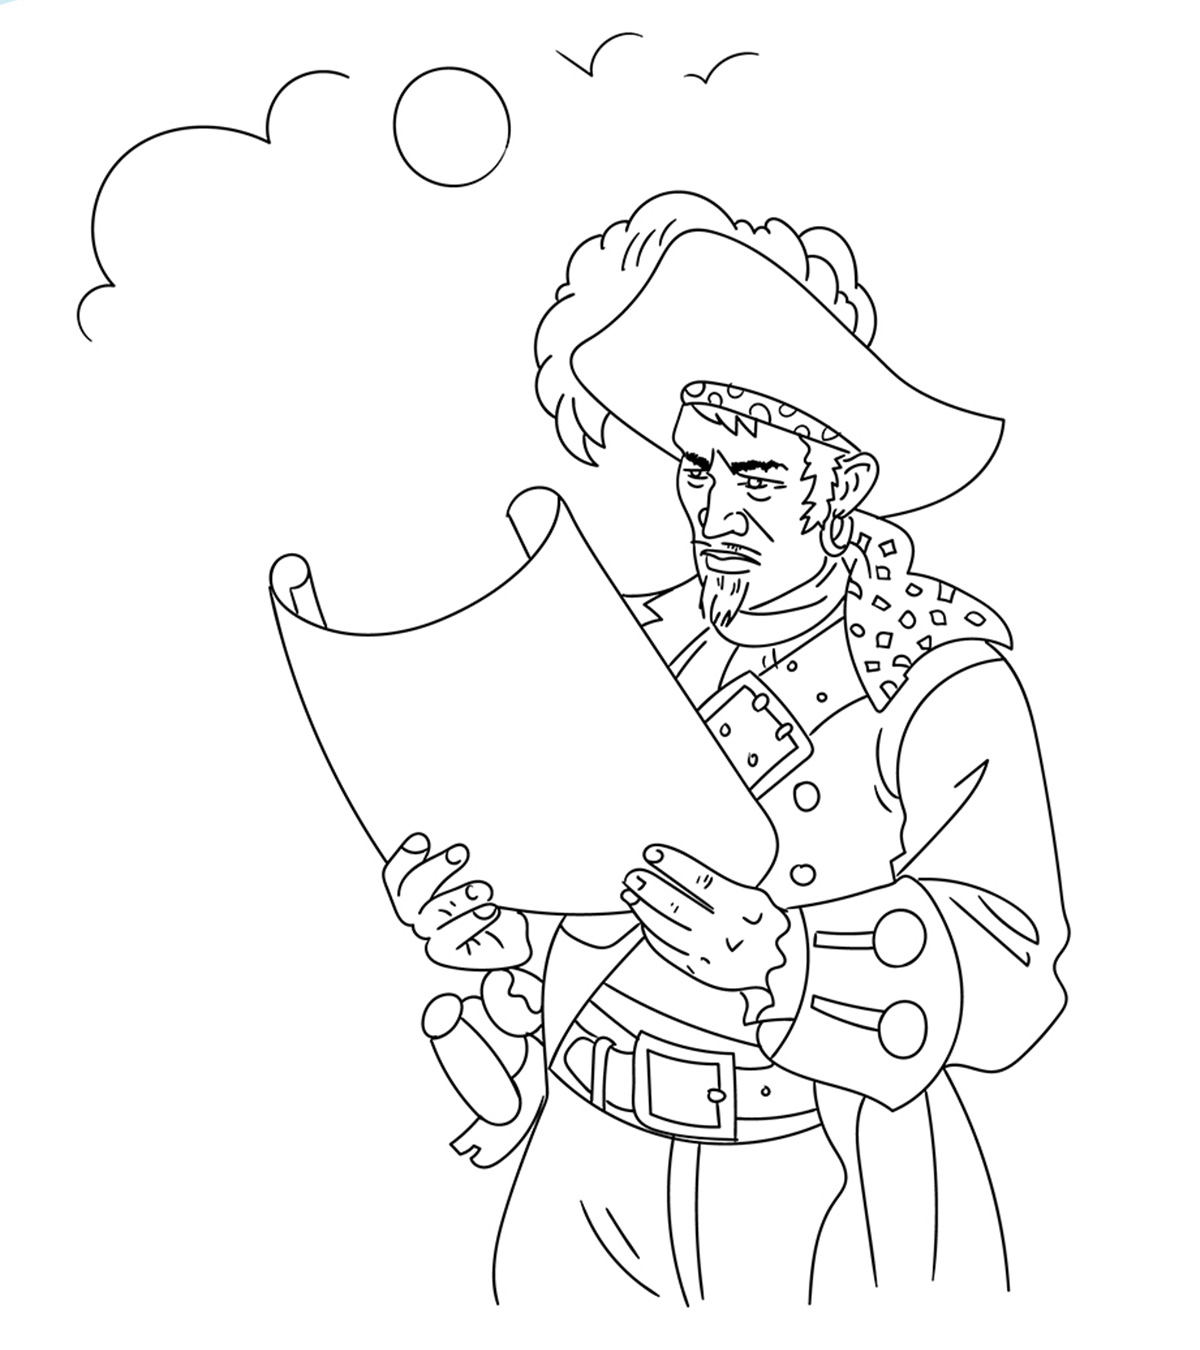 Top 10 Pirates Of The Caribbean Coloring Pages For Your Little Ones